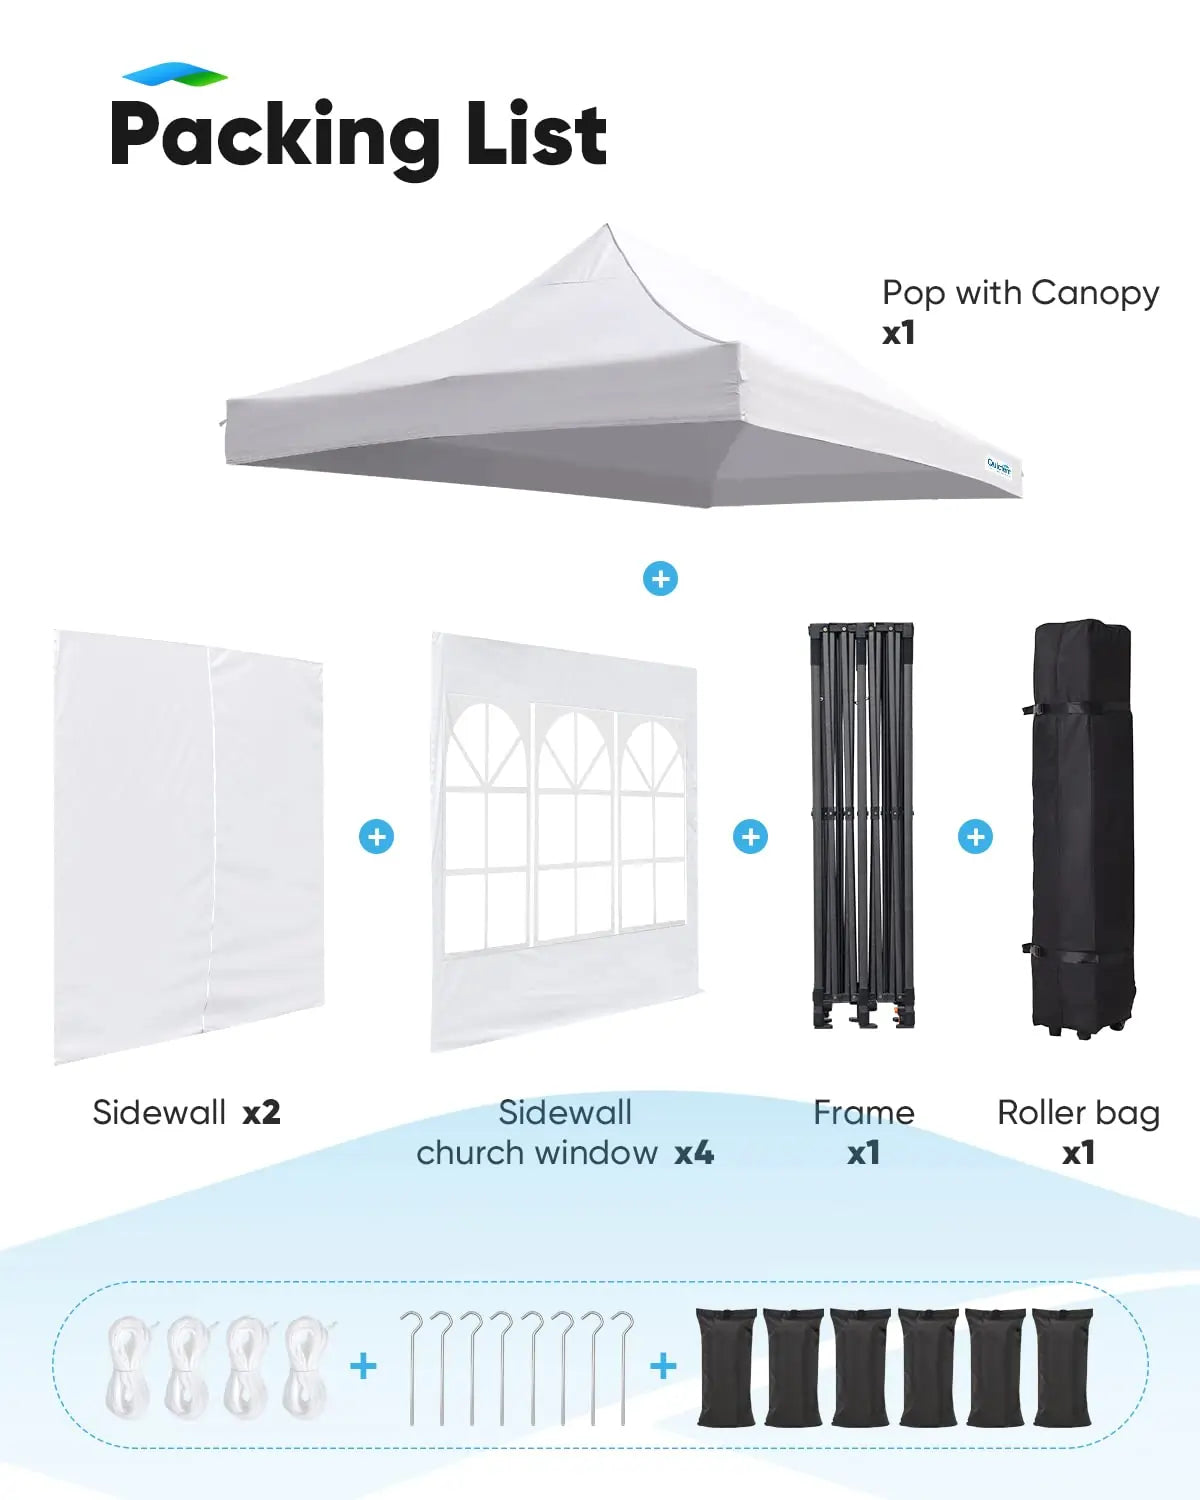 Packing list of 10x20 canopy tent